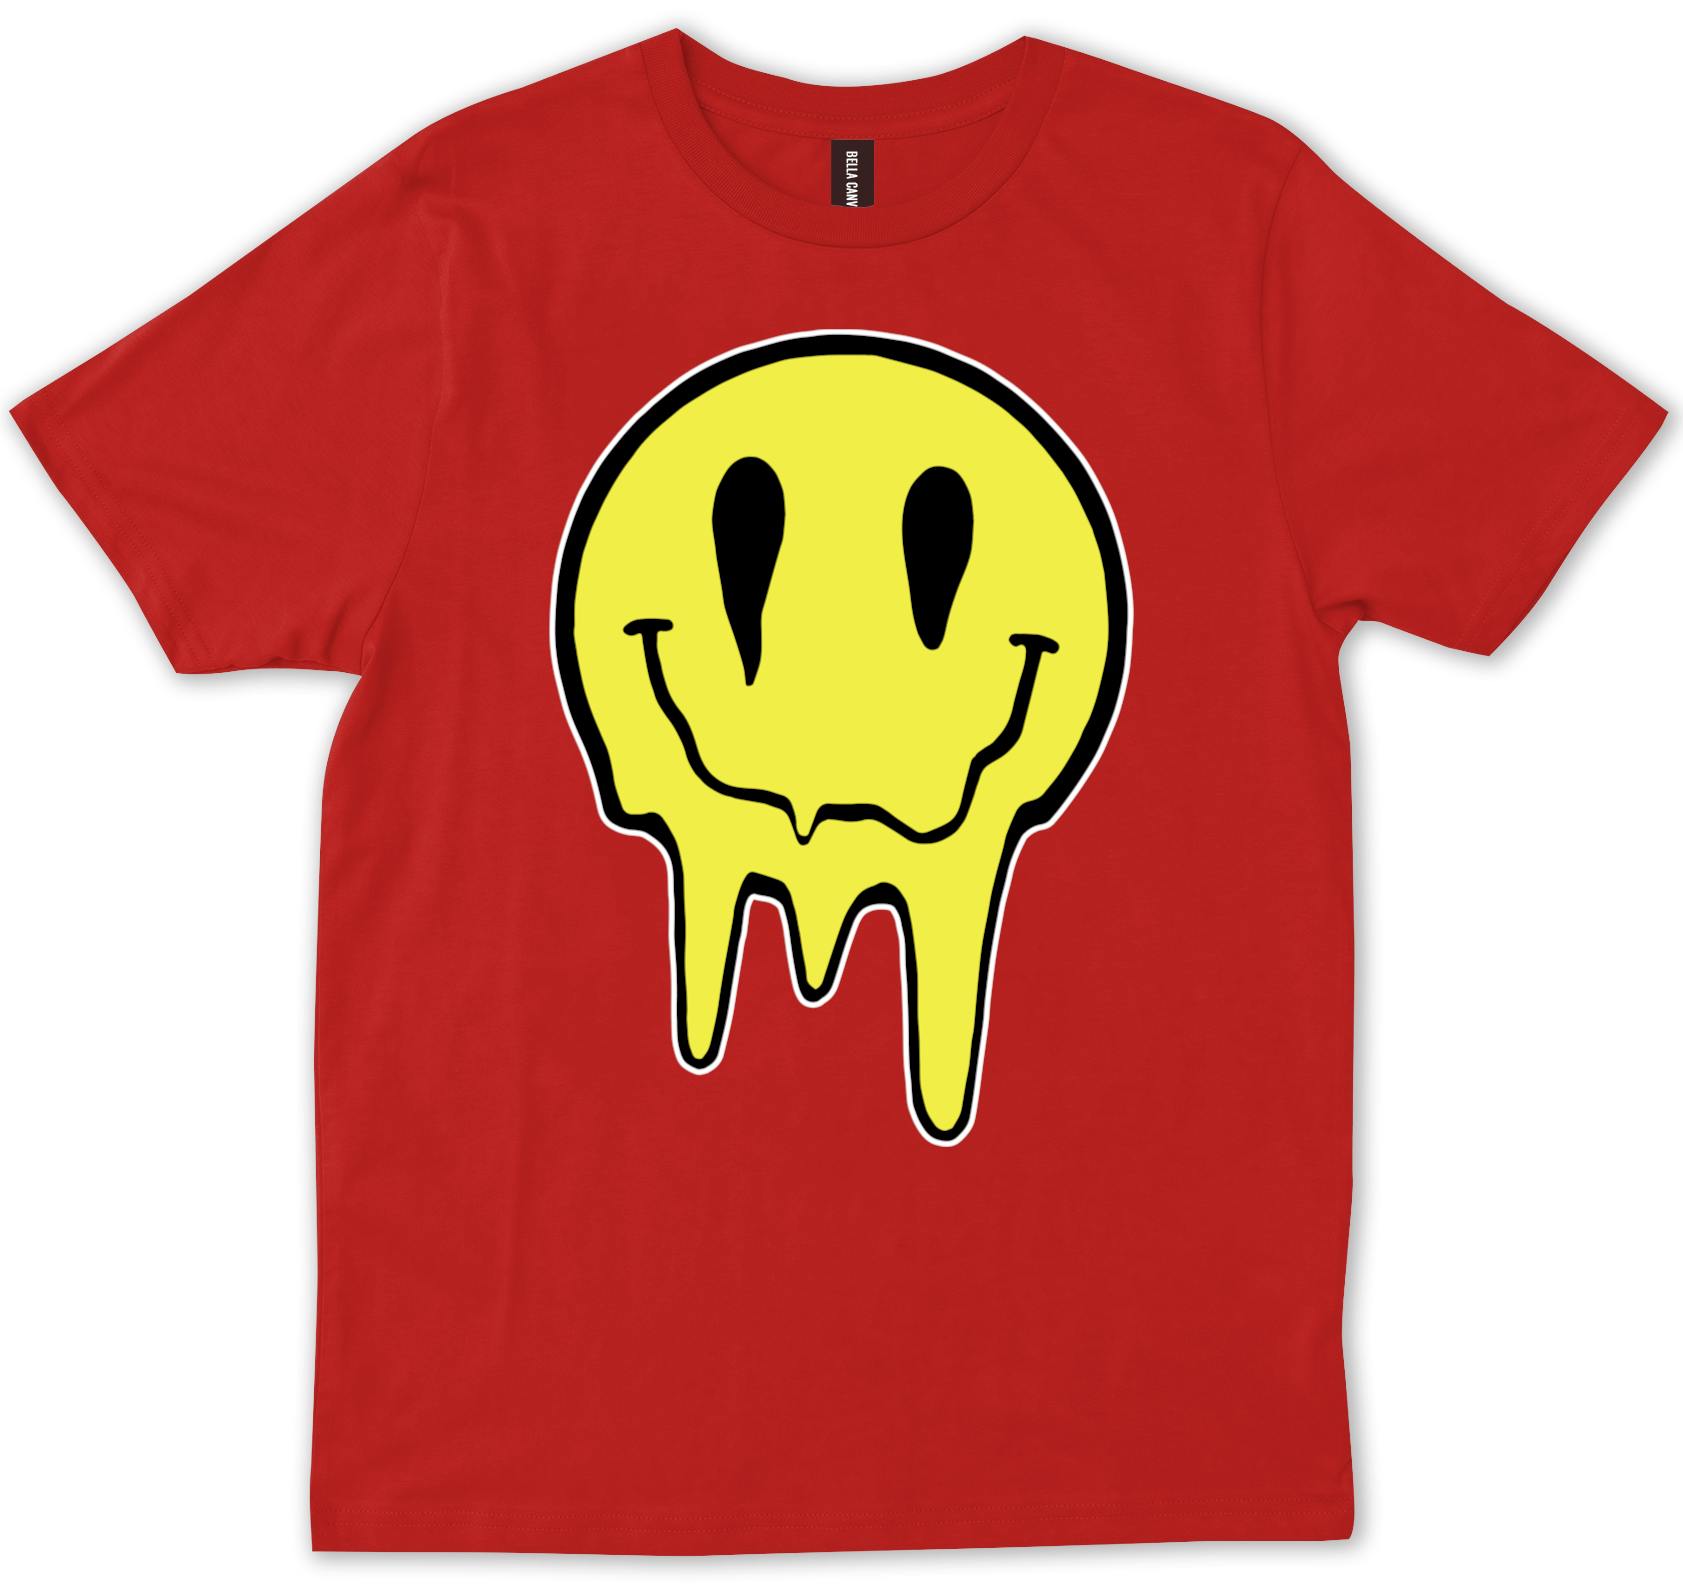 Acid Dripping Smiley Face t Shirt Vintage Gift For Men Women Funny Tee